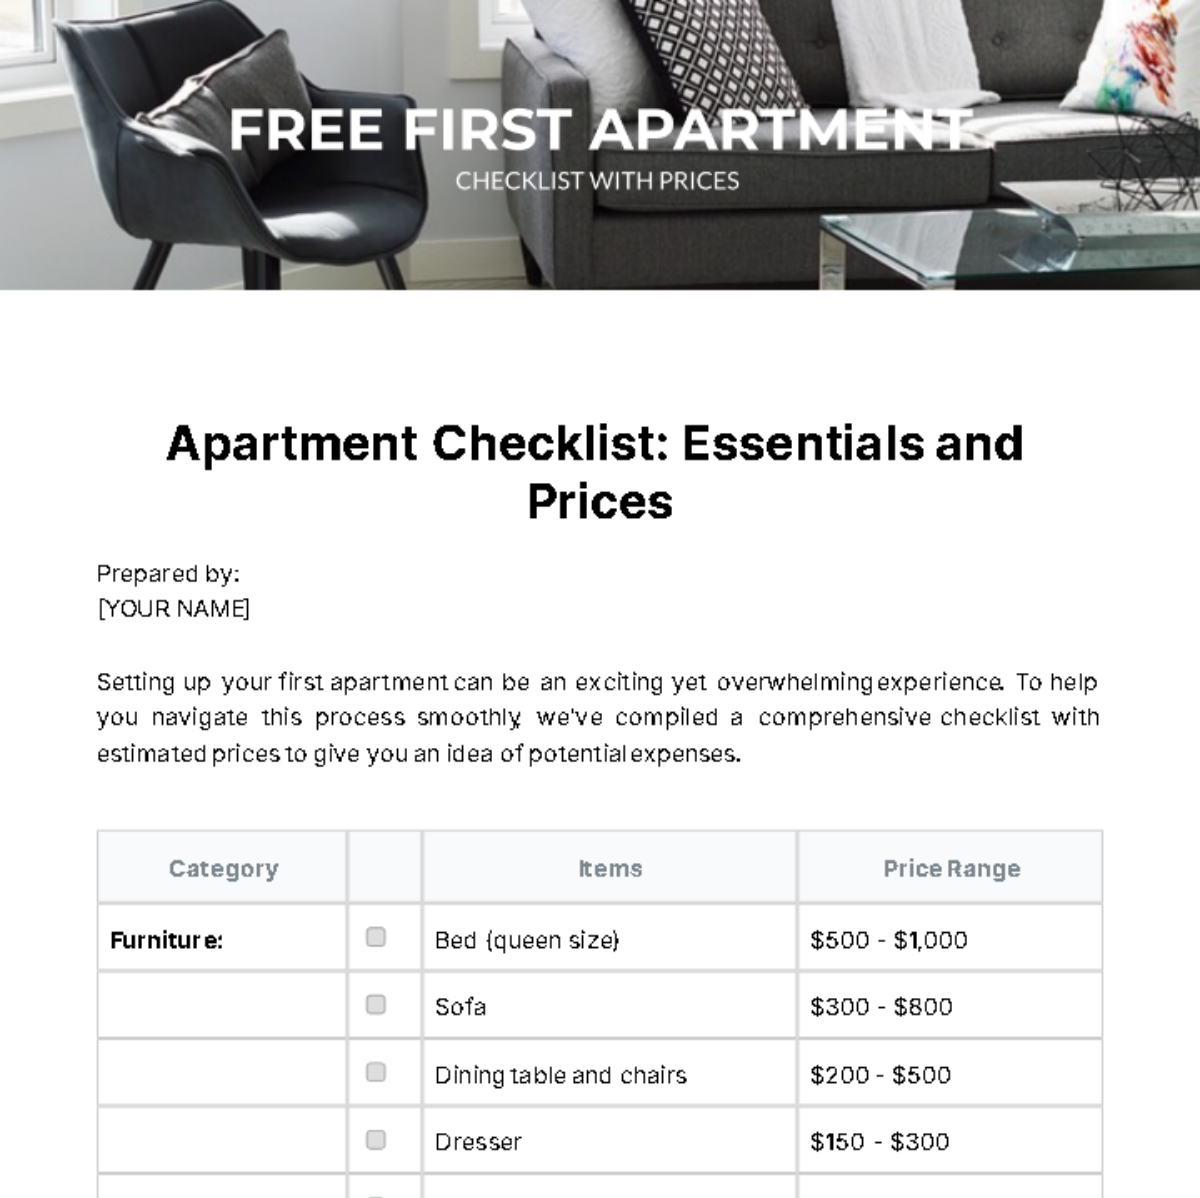 Free First Apartment Checklist With Prices Template